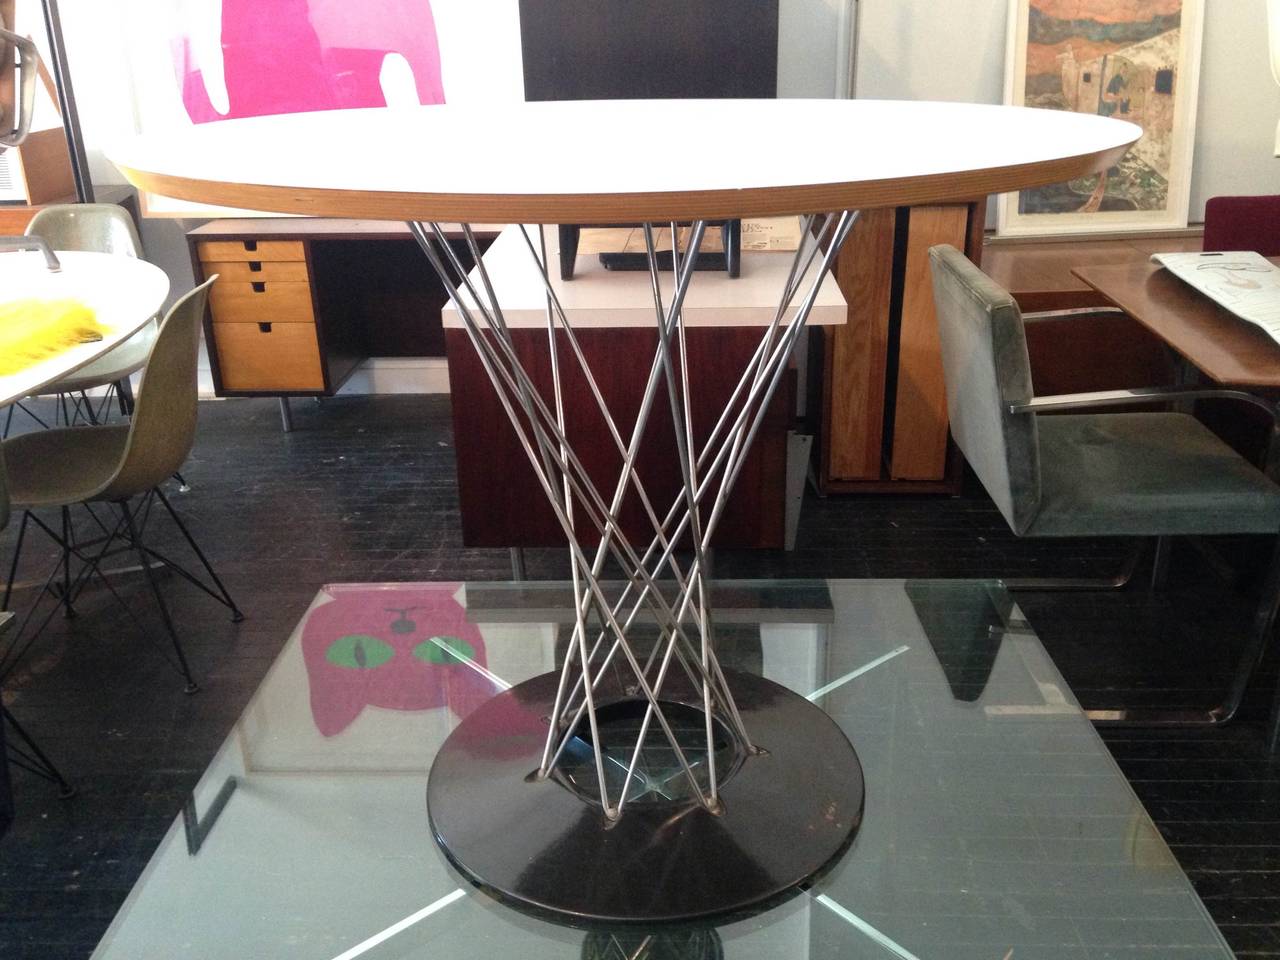 Cyclone Table designed by Isamu Noguchi for Knoll in 1955
White laminate top, steel wire column, cast Ironbase